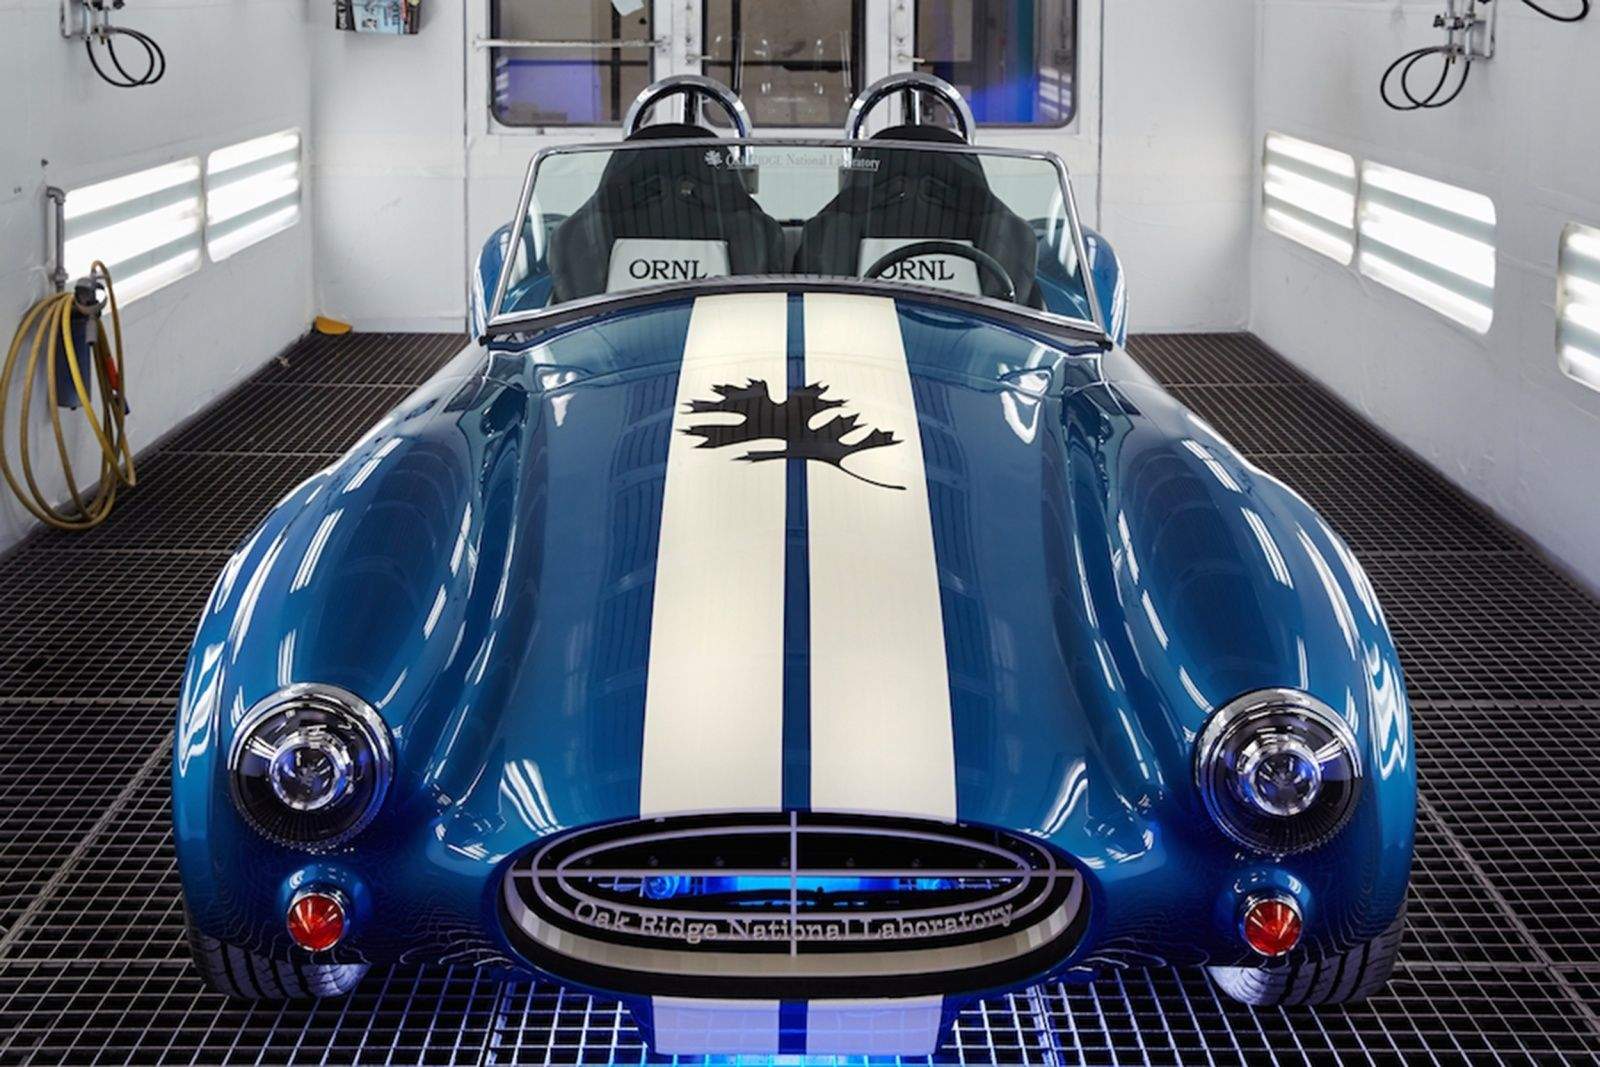 A blast from the past got a blast from a 3-D printer. This replica Shelby Cobra is on display this week at the Detroit Auto Show. Photo: Oak Ridge National Laboratory